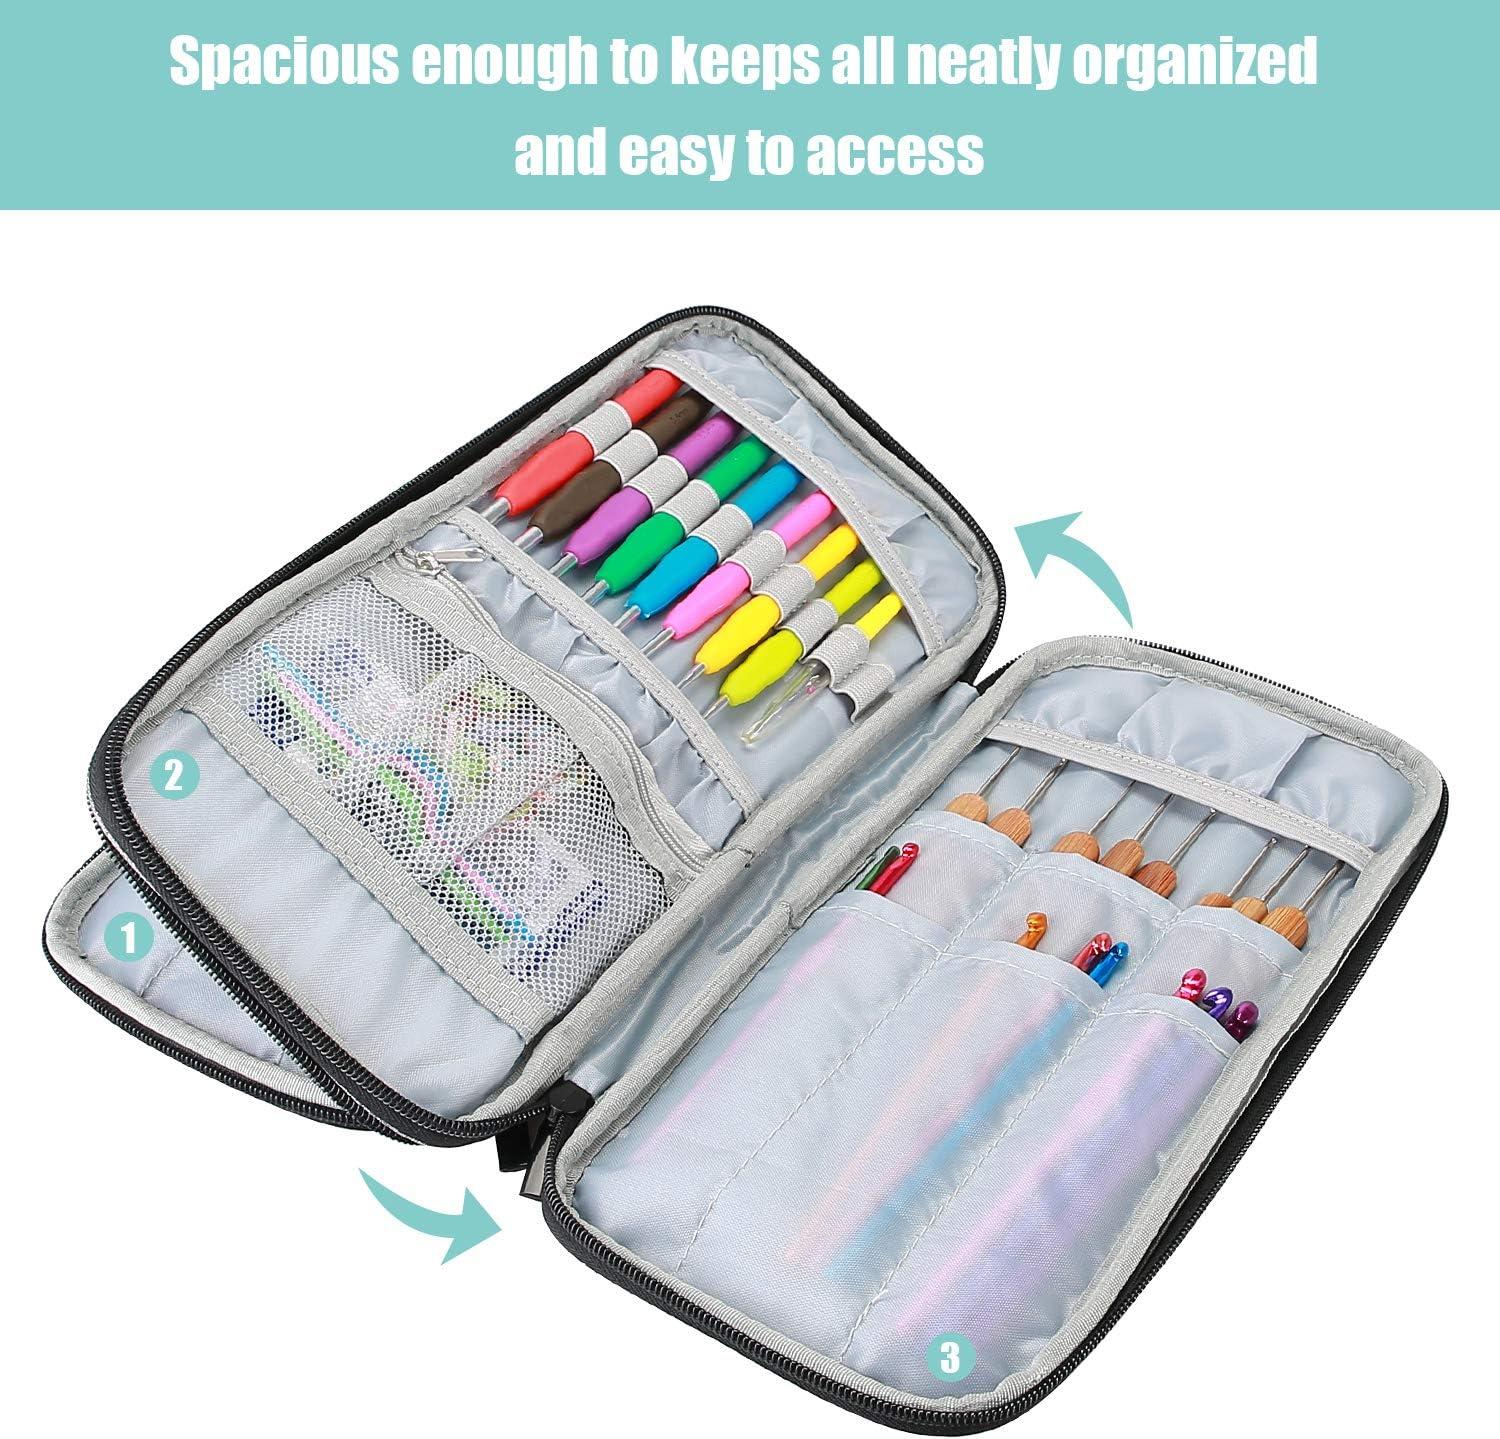 ProCase Crochet Hook Case (up to 6.5 Inches), Travel Organizer